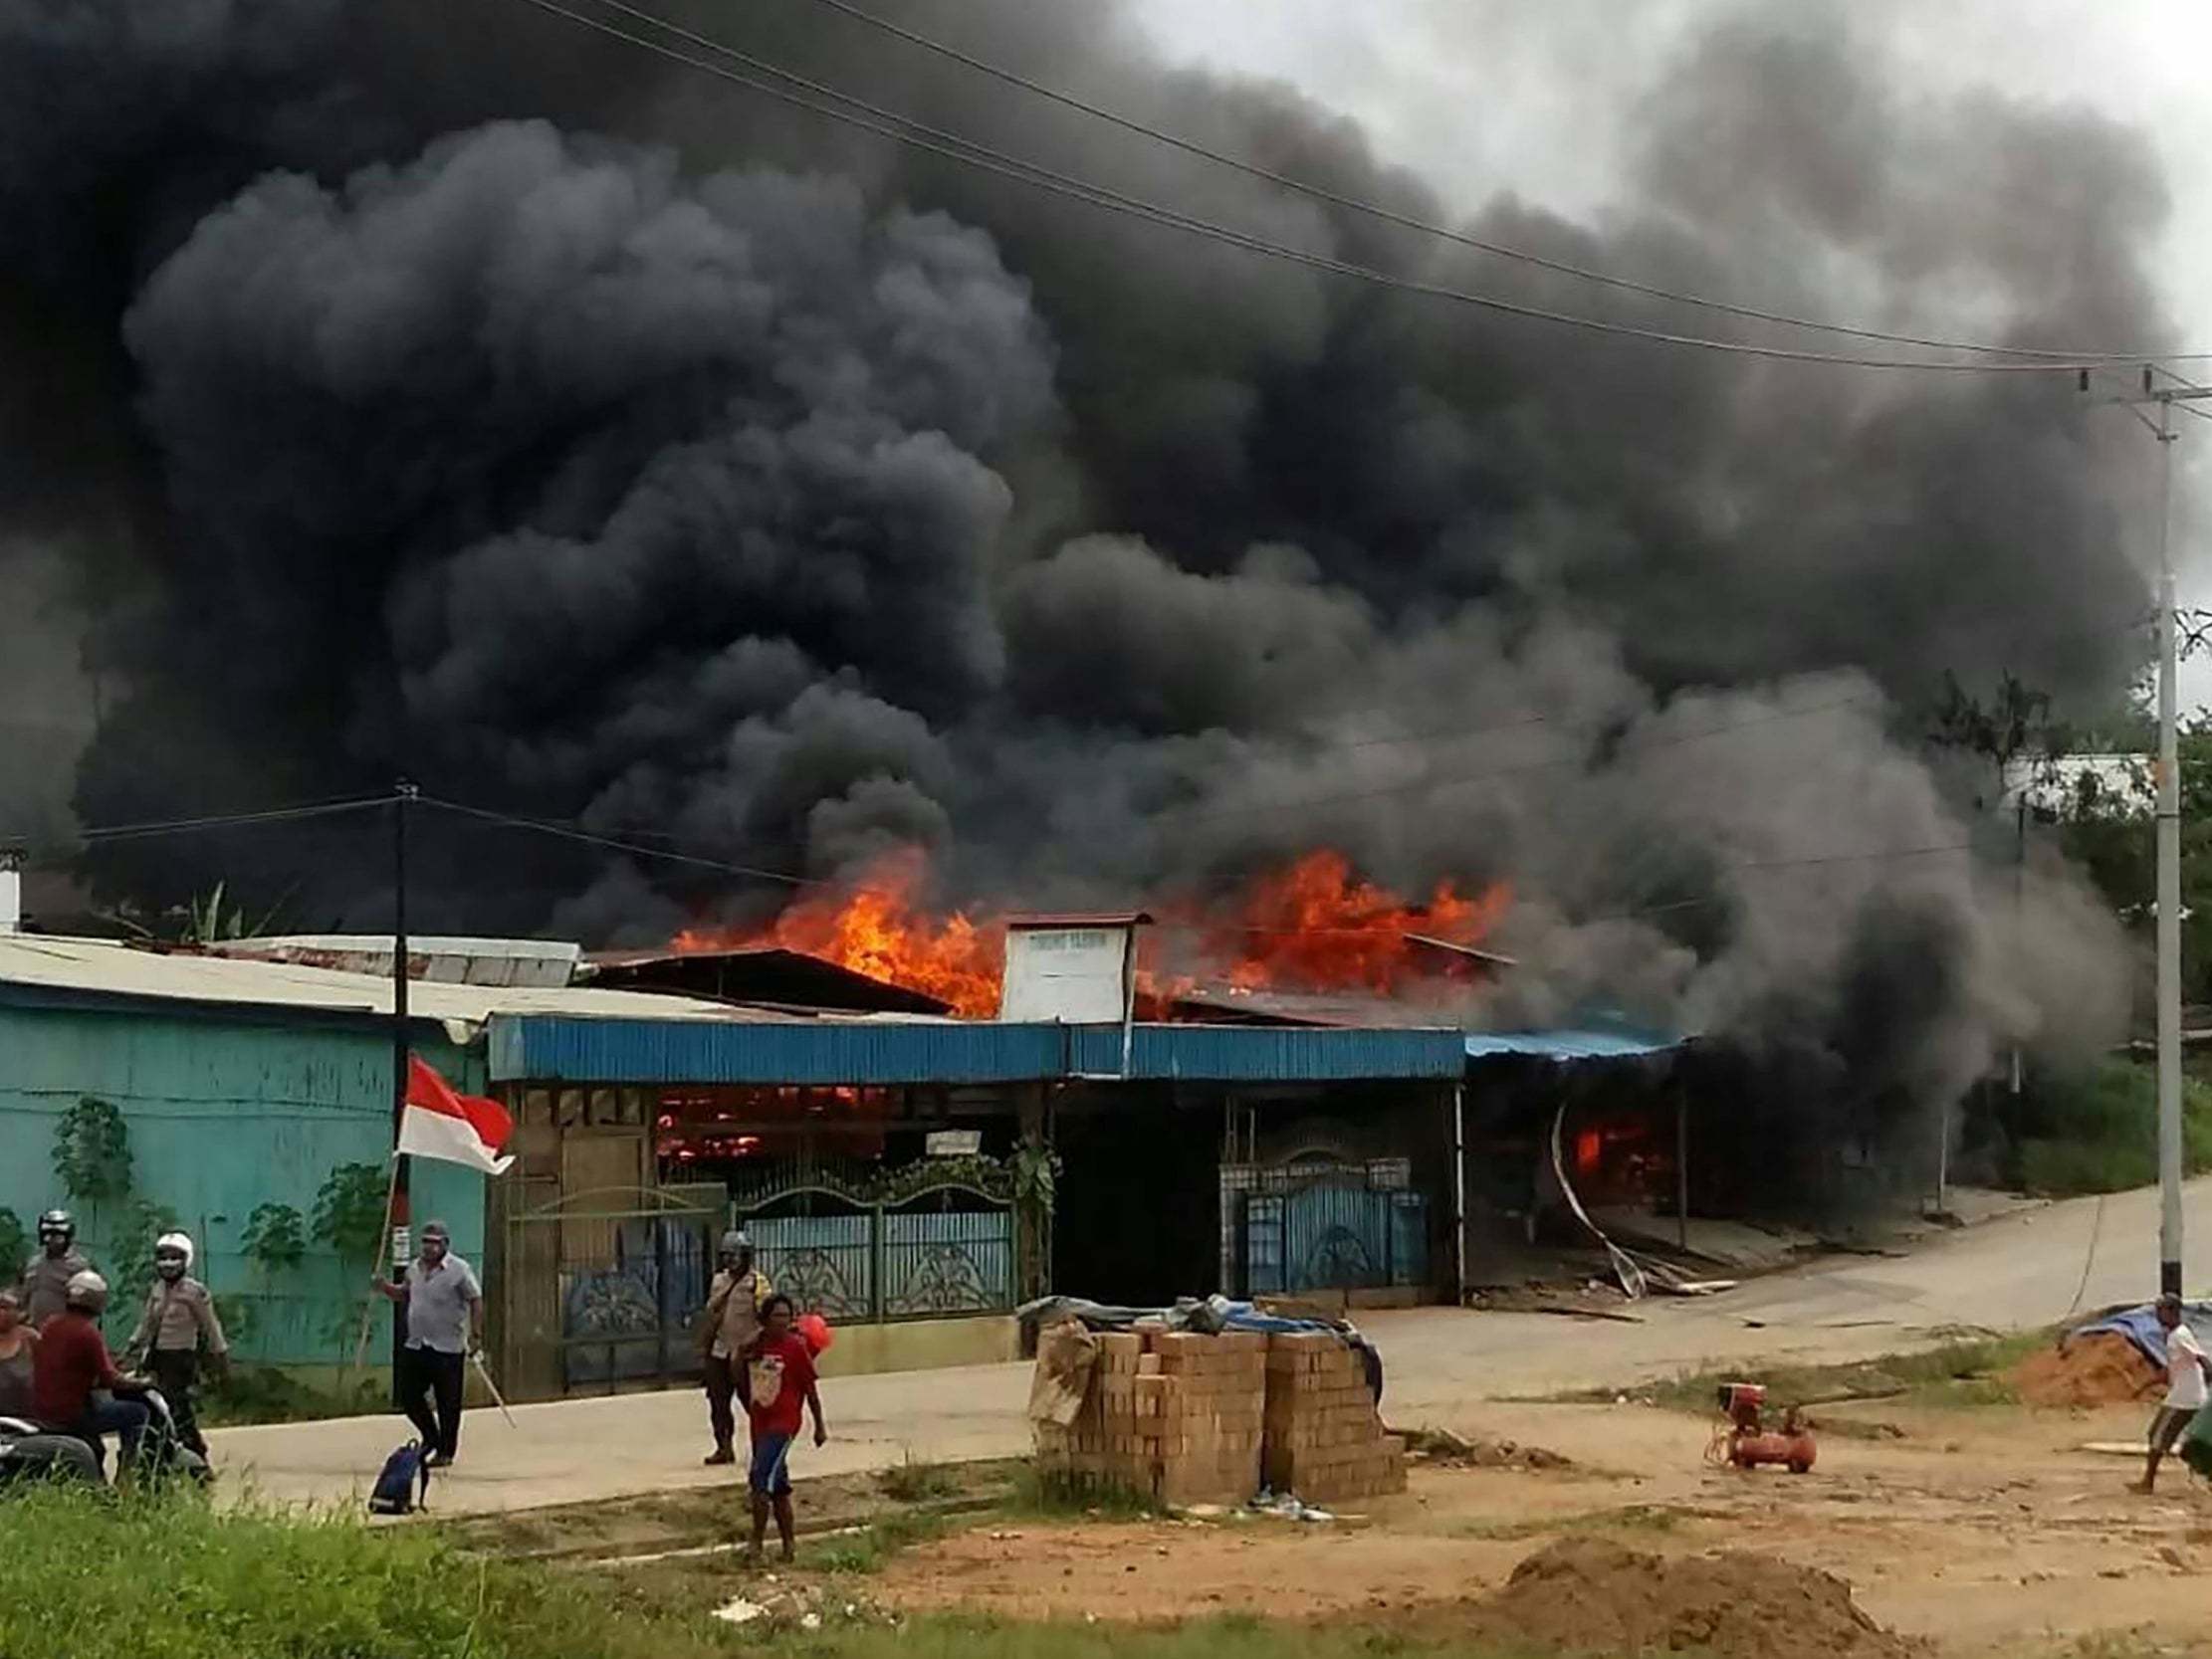 Rioting demonstrators set fire to a building in Sorong, Indonesia